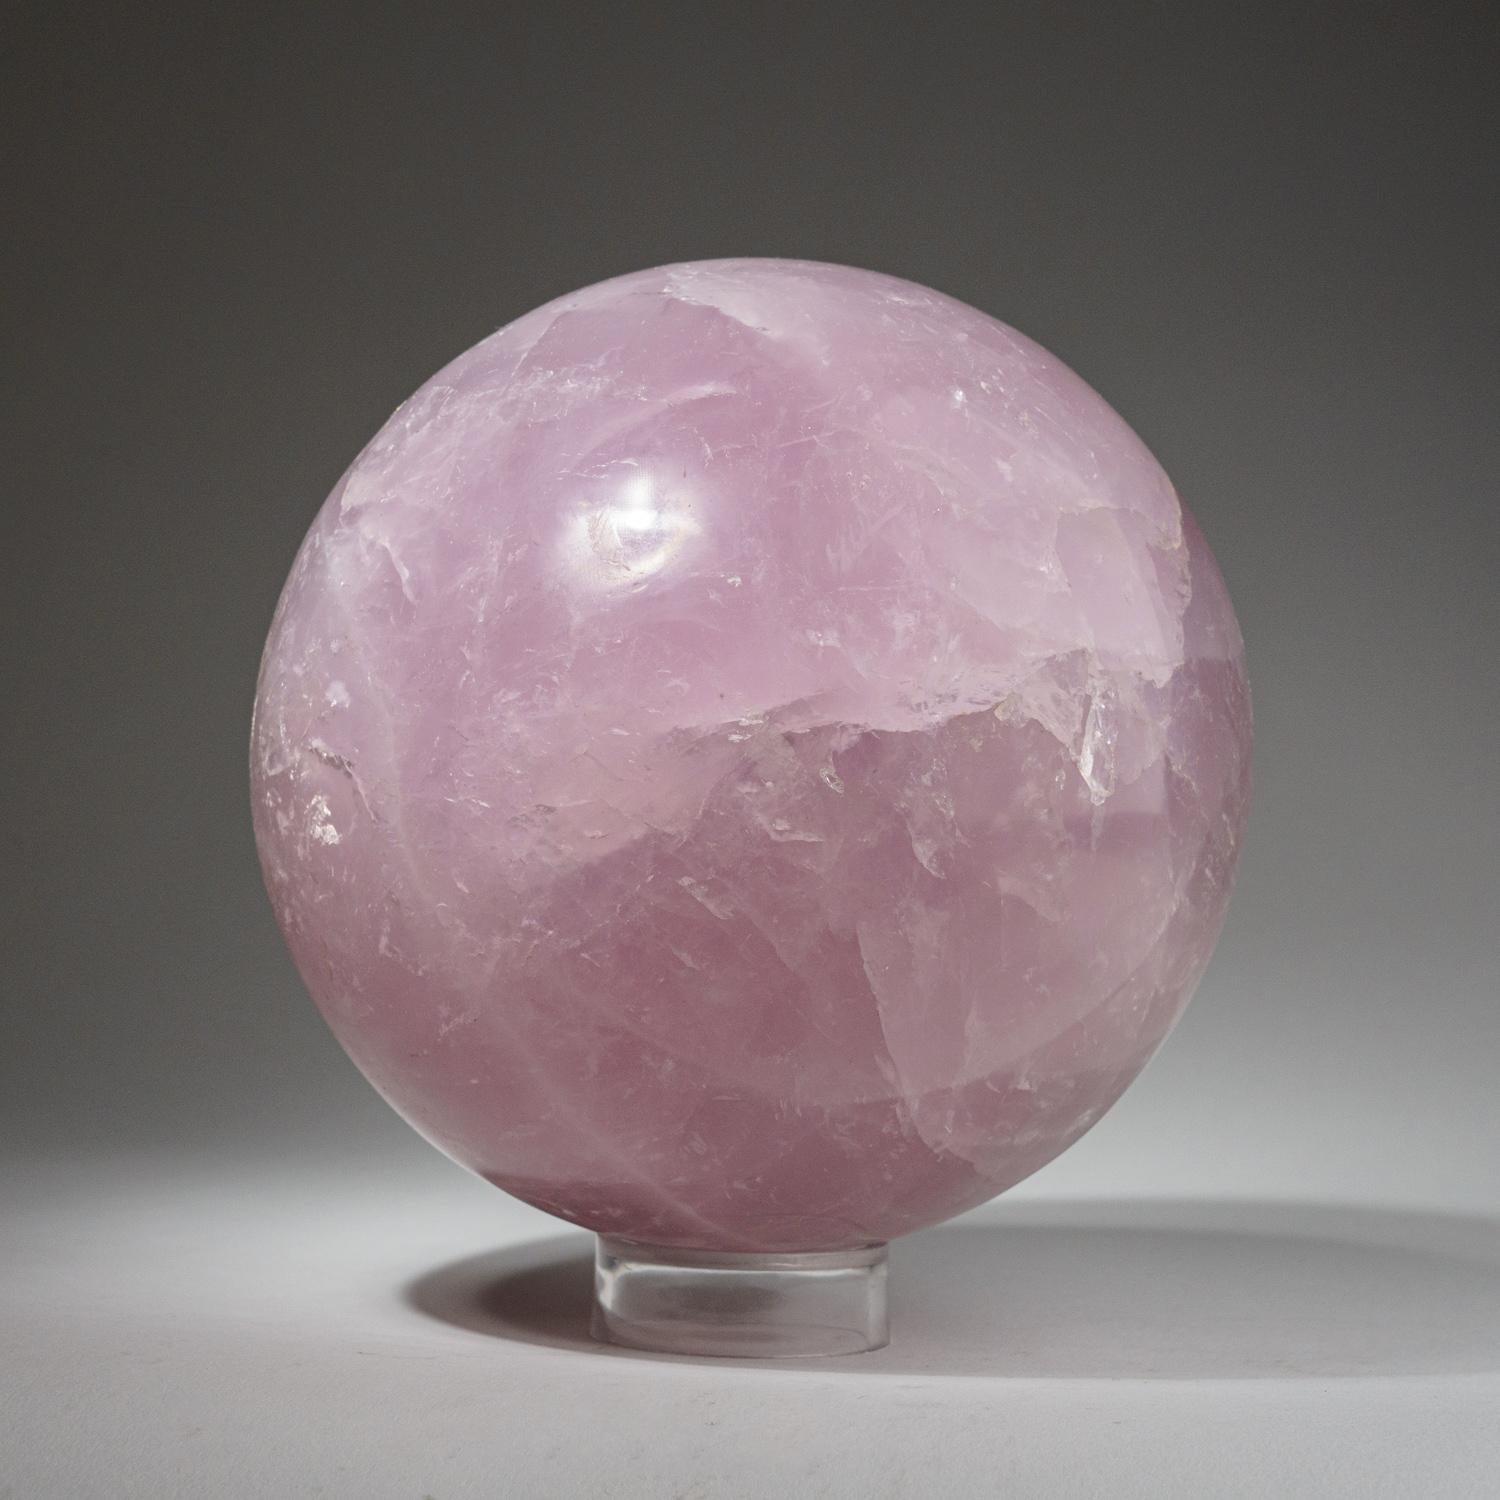 Malagasy Polished Rose Quartz Sphere from Madagascar (10.2 lbs) For Sale